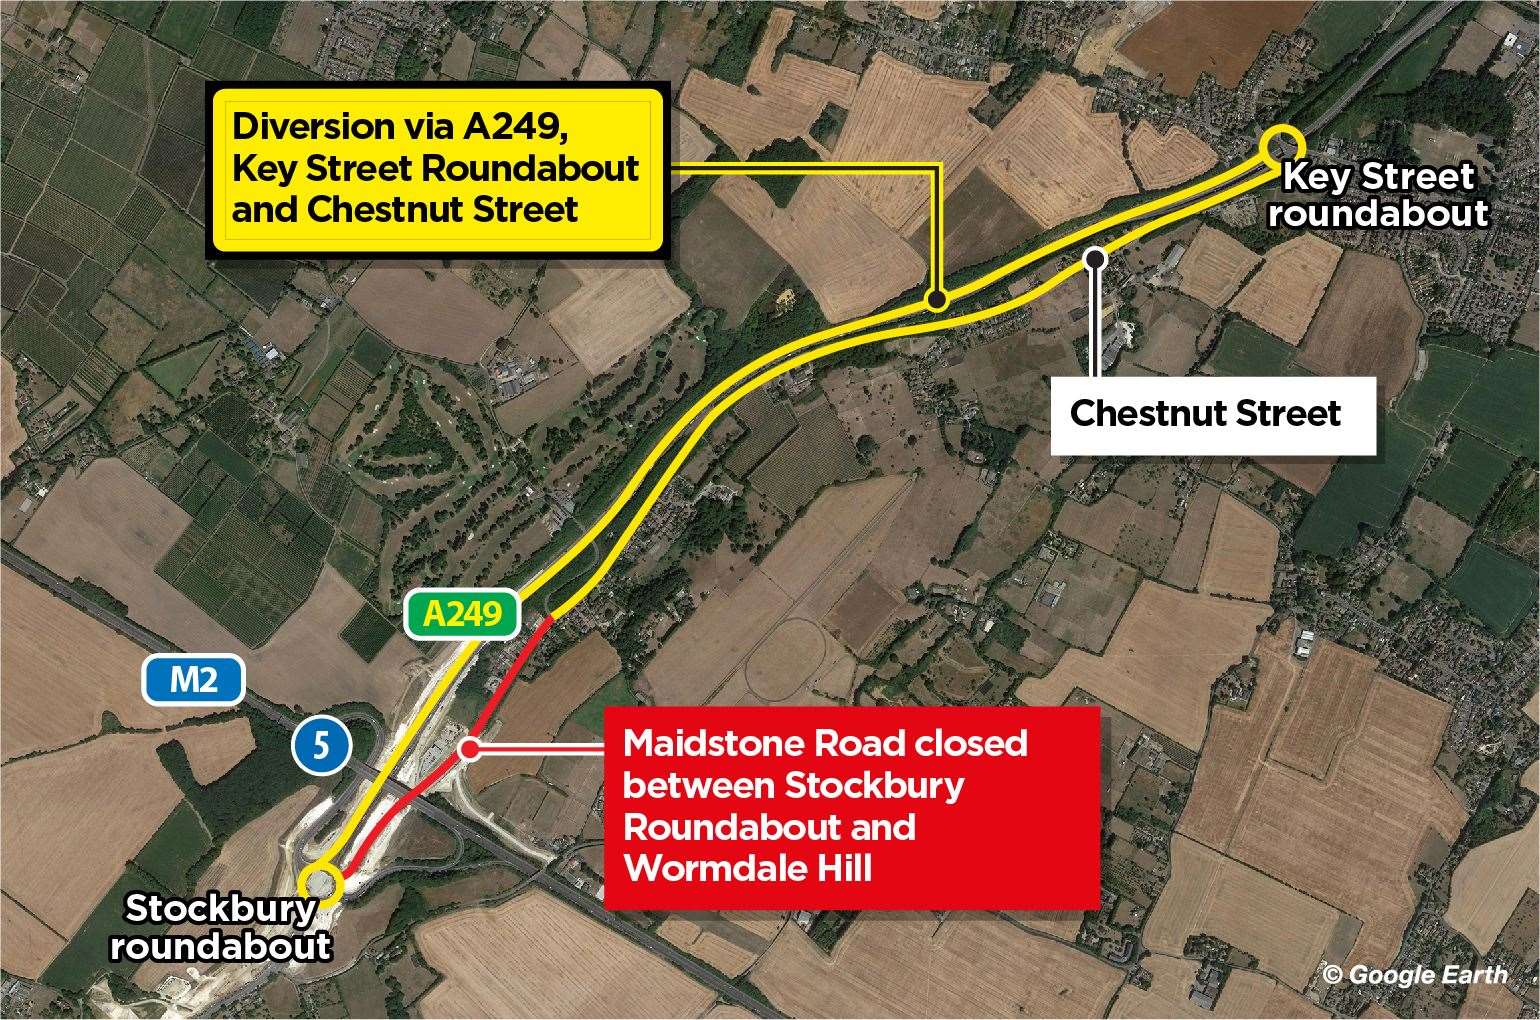 Where the closure of Maidstone Road is and the diversion route available